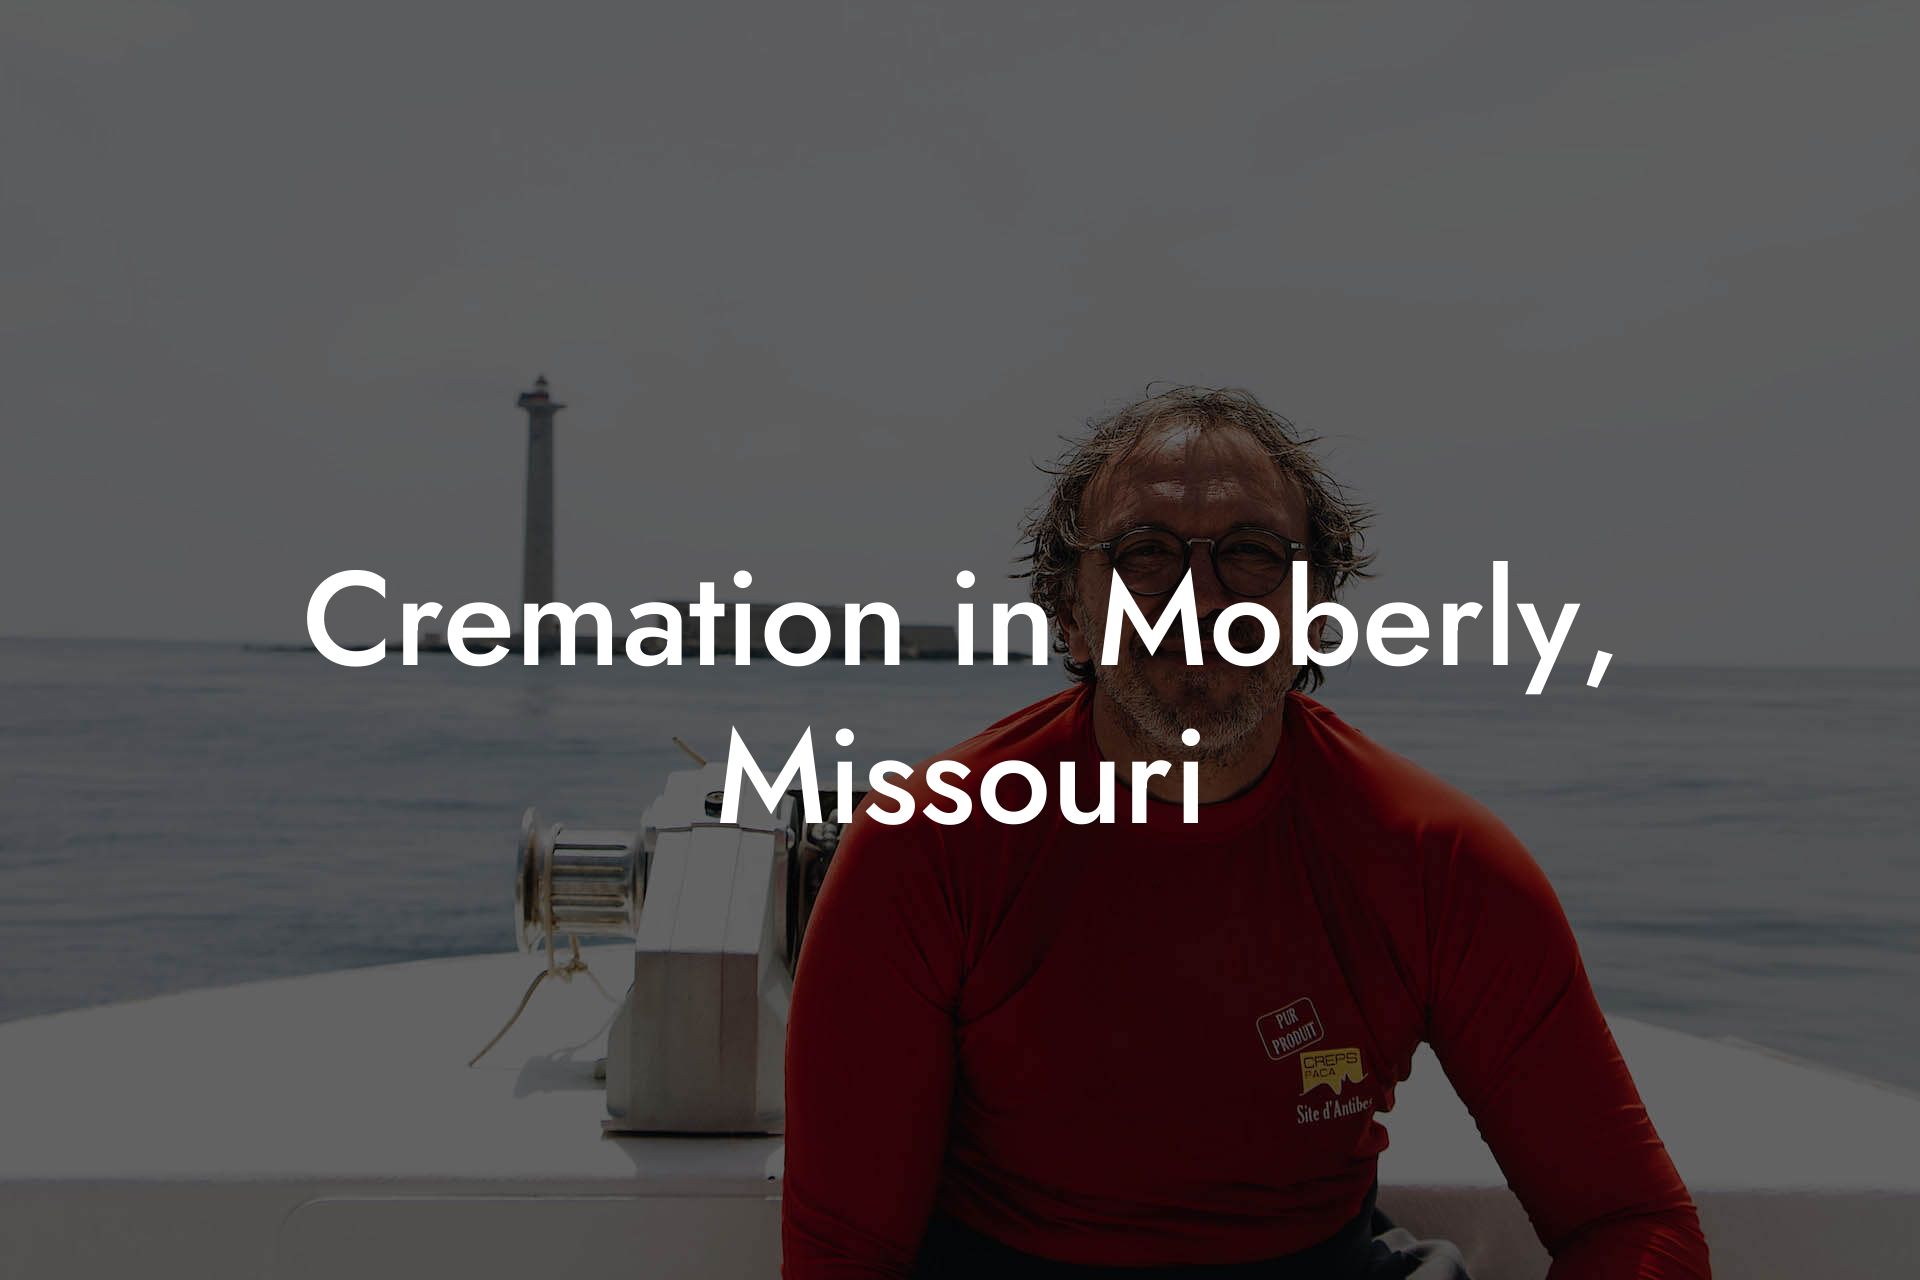 Cremation in Moberly, Missouri